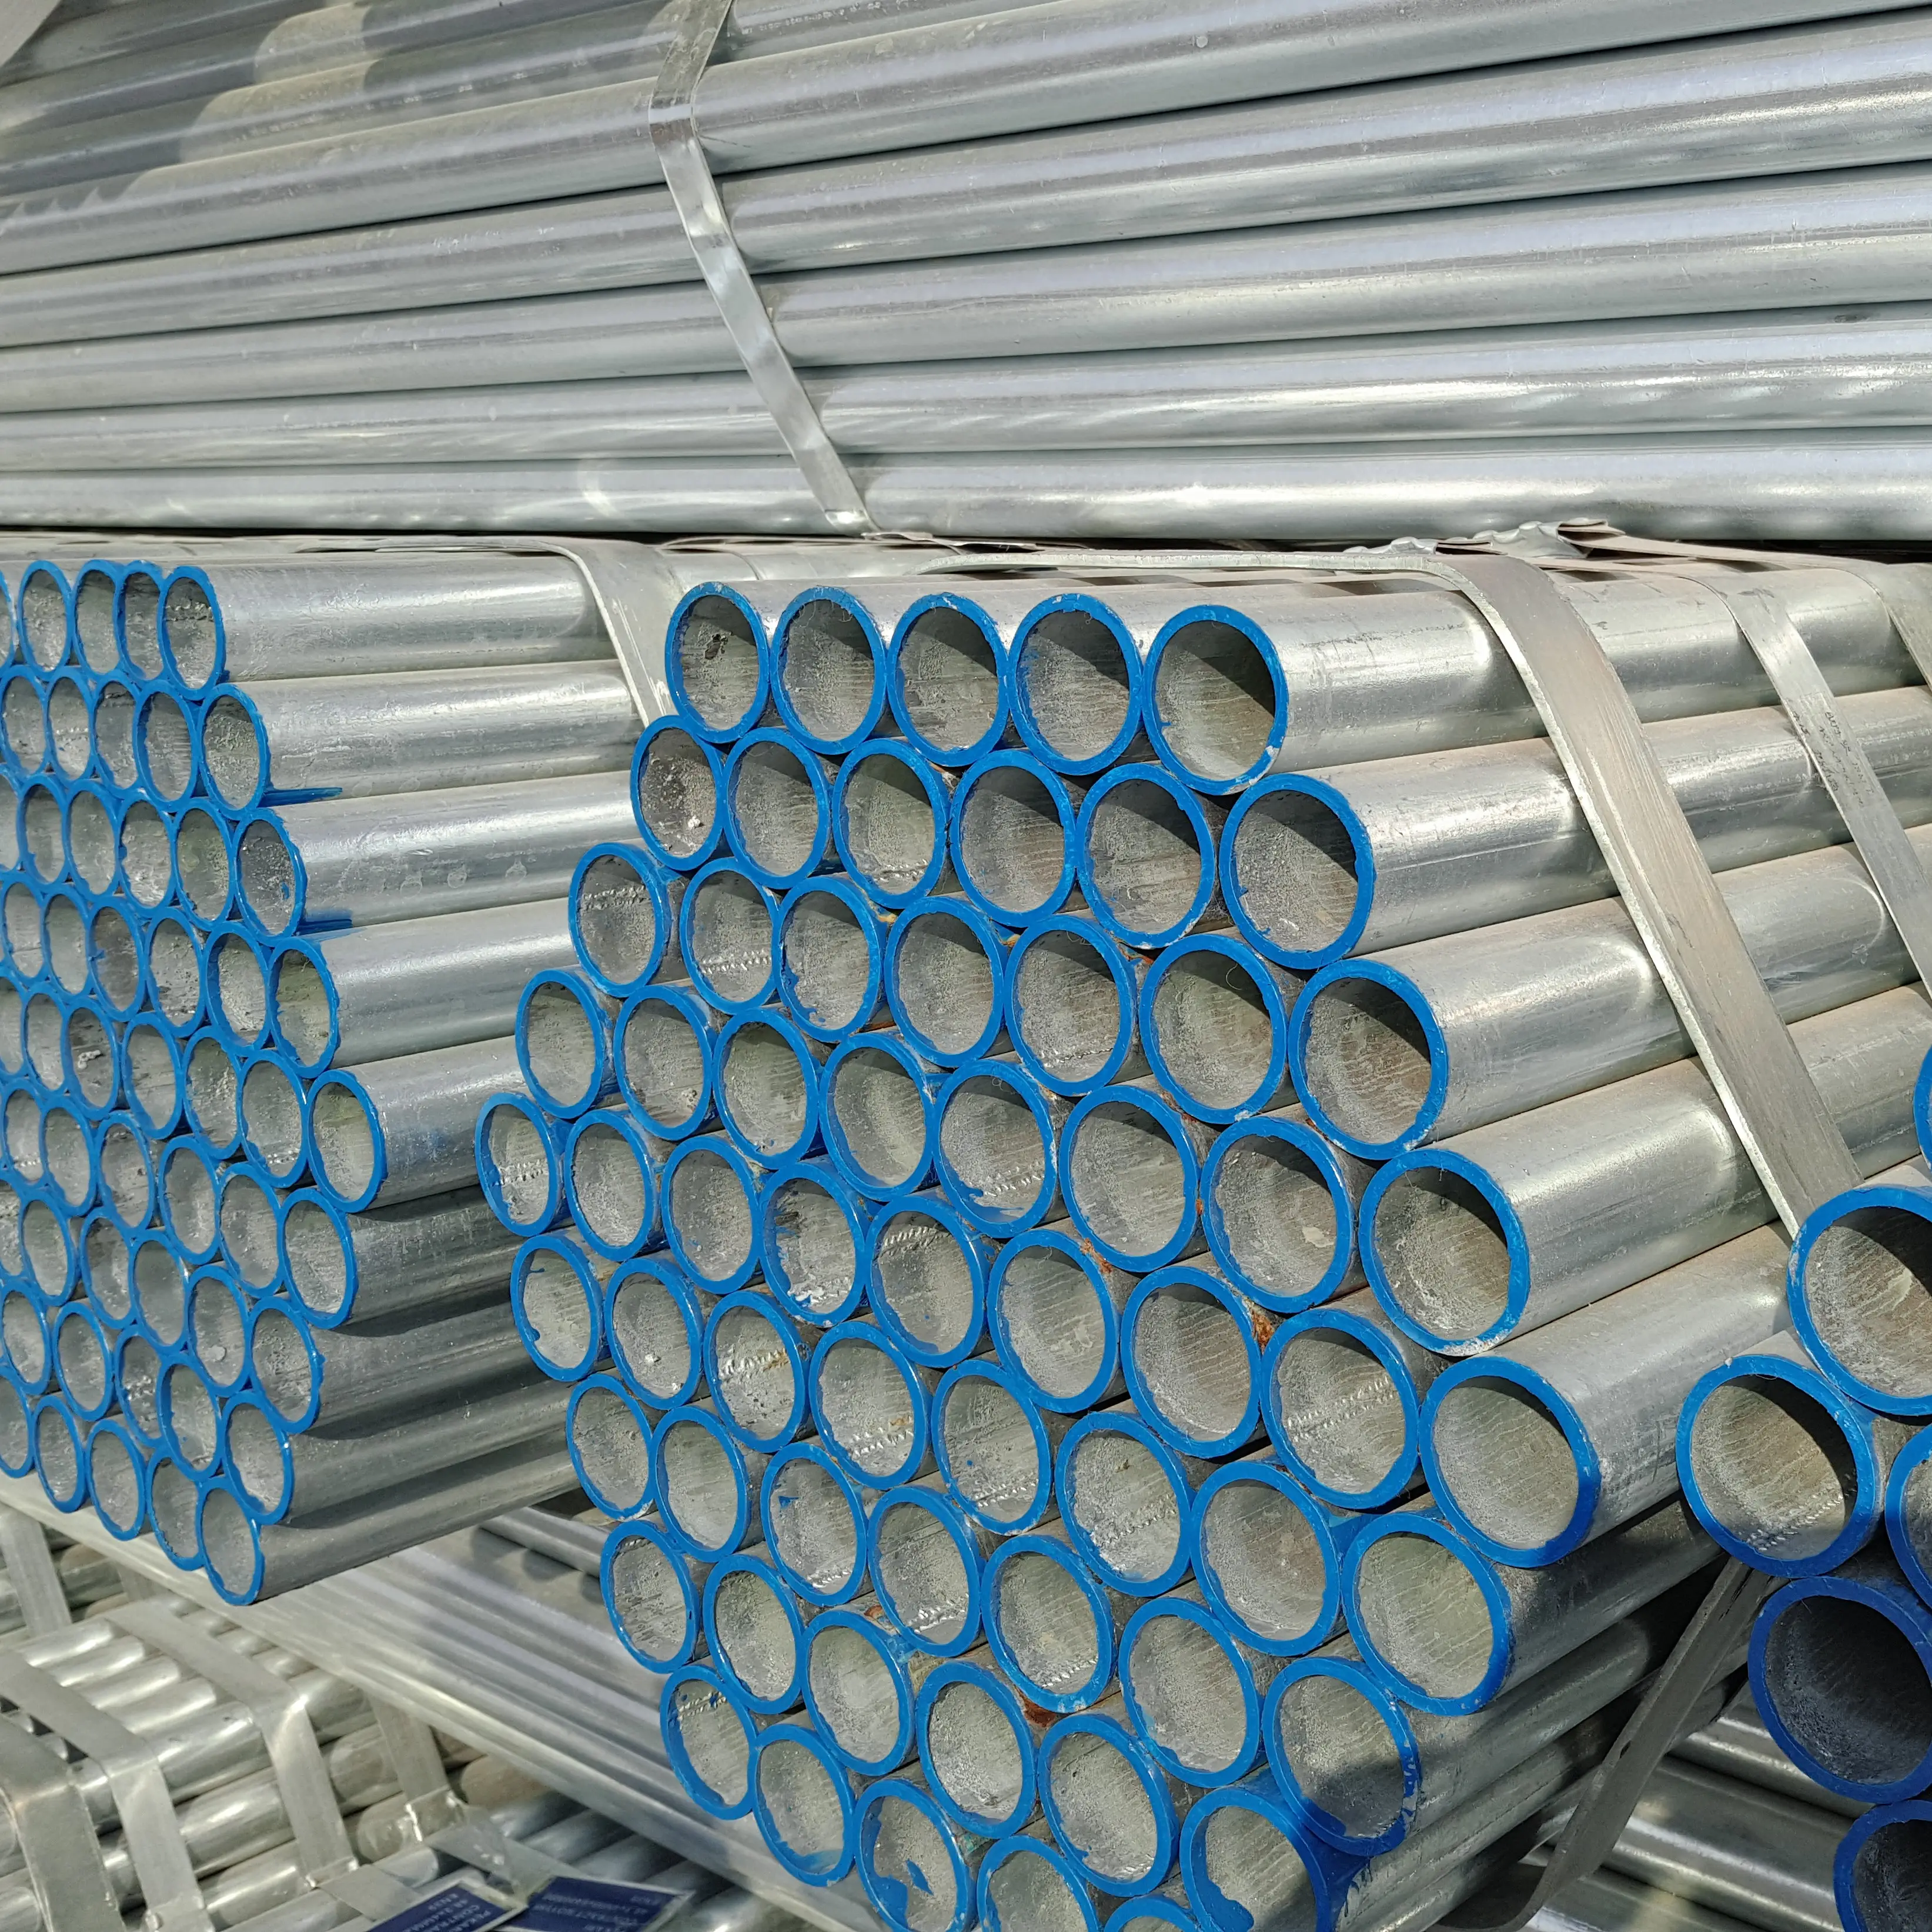 Seamless Galvanized Pipe Steel Roofing Galvanized Seamless Welded Steel Pipes And Tubes